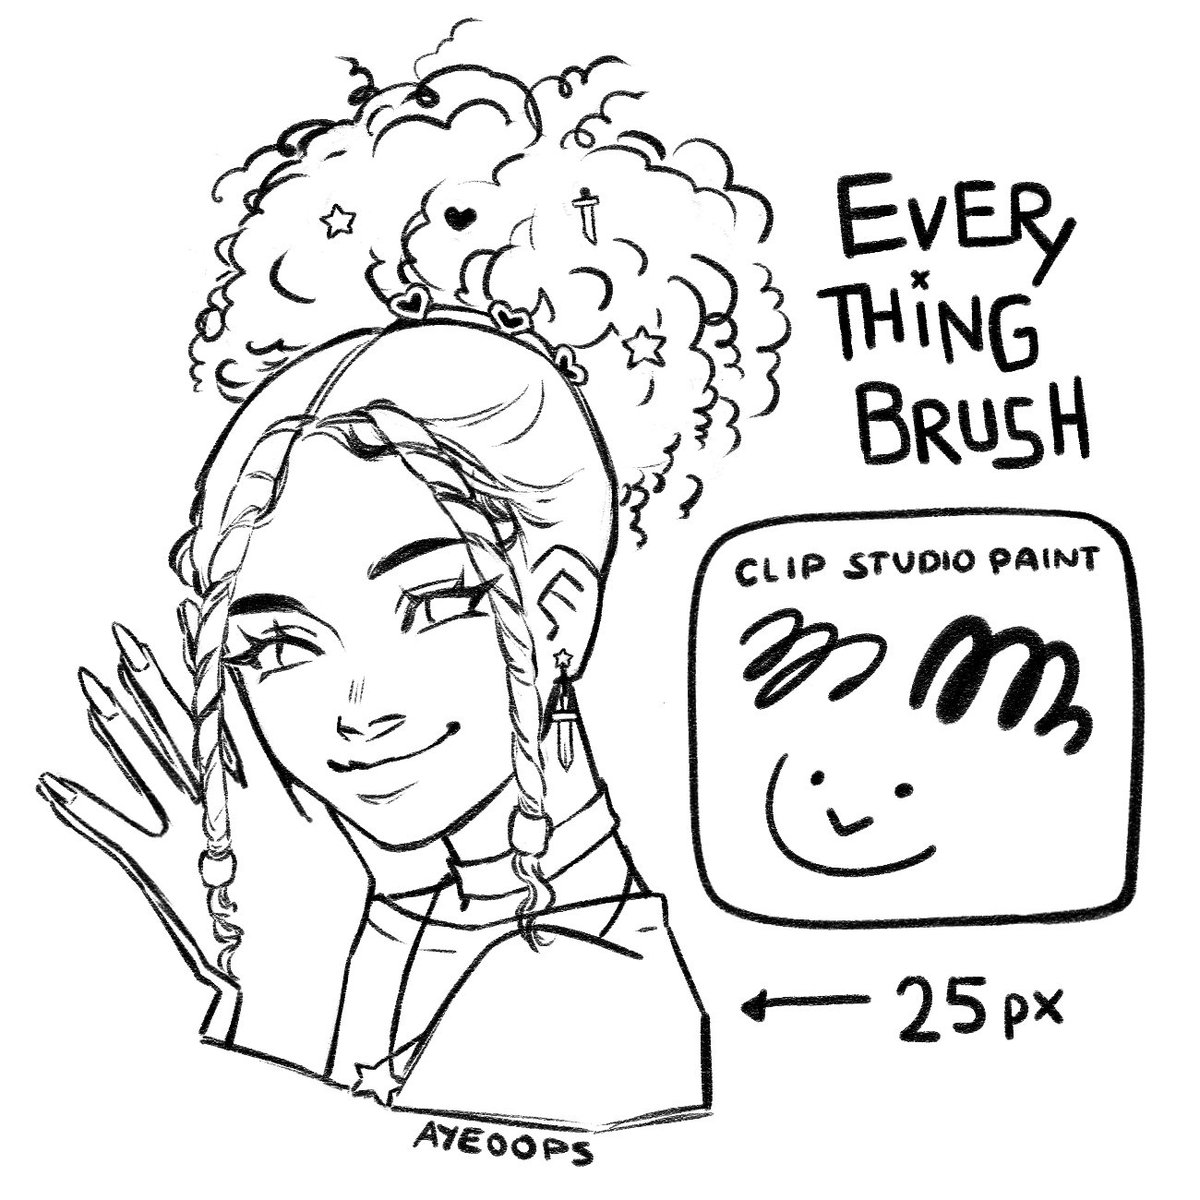 introducing the EVERYTHING BRUSH ⭐️
people have been wanting it, so i shared my brush on gumroad! 